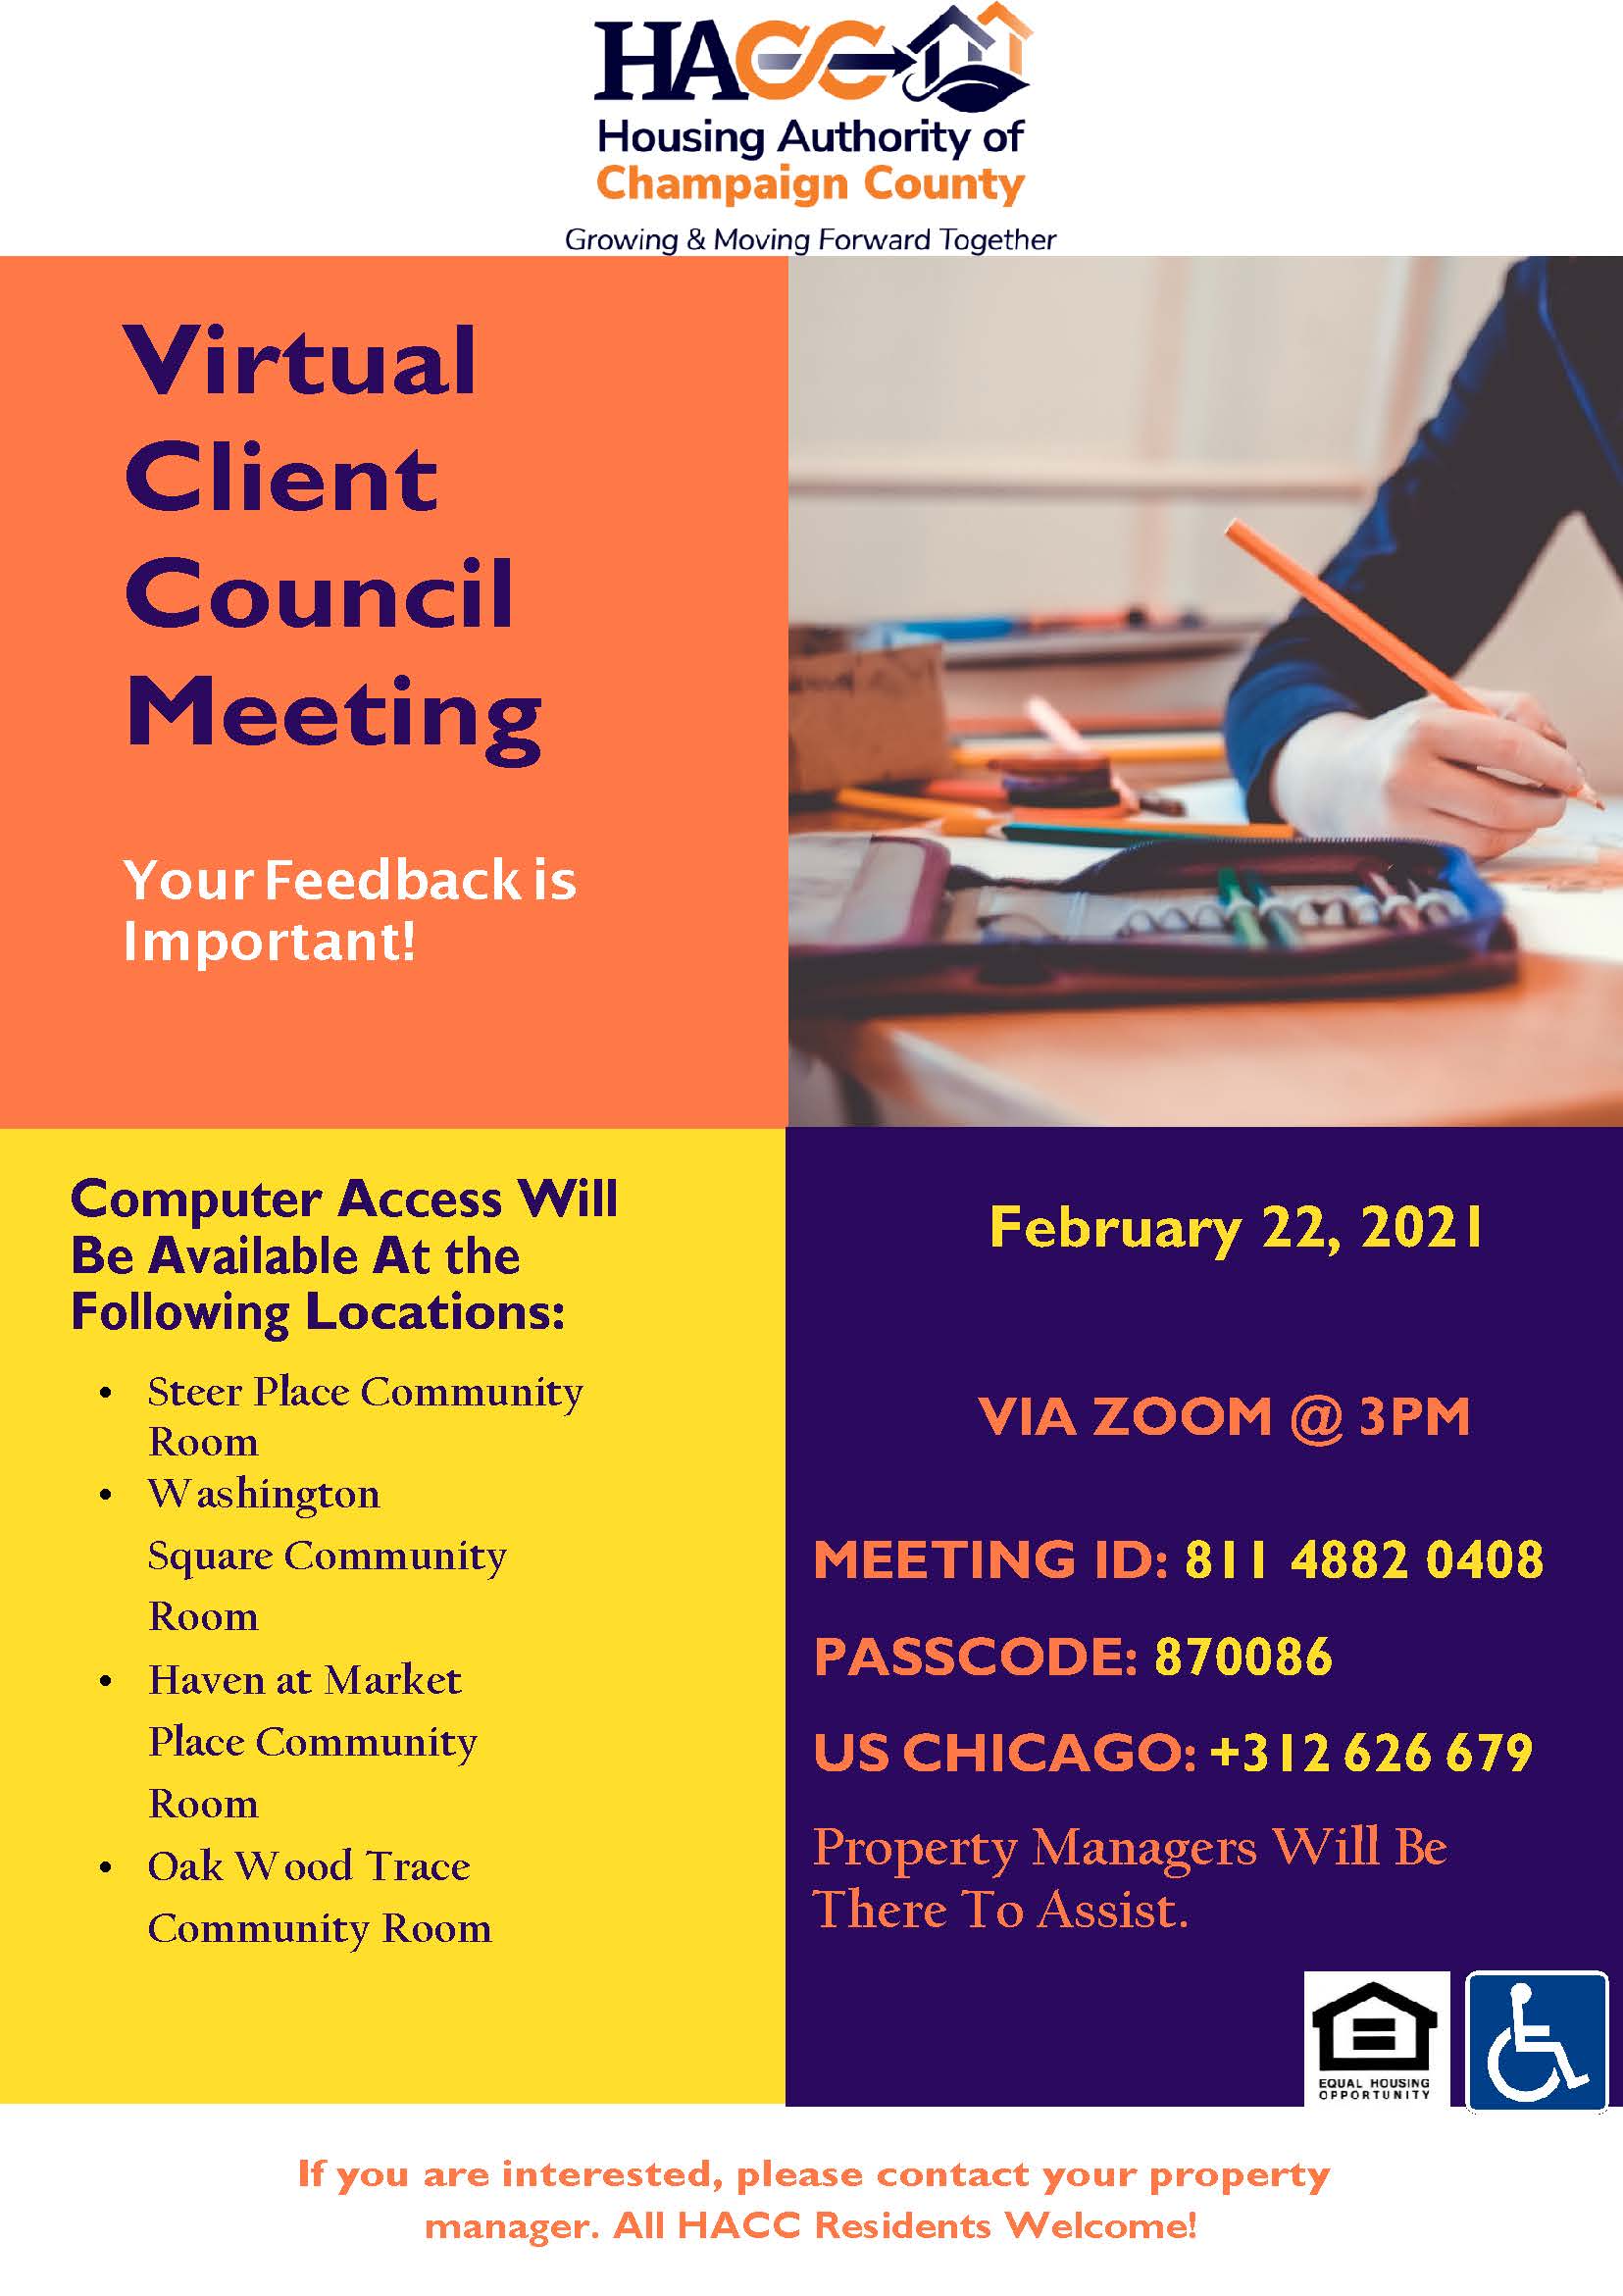 Virtual Client Council Meeting flyer, all information as listed below.